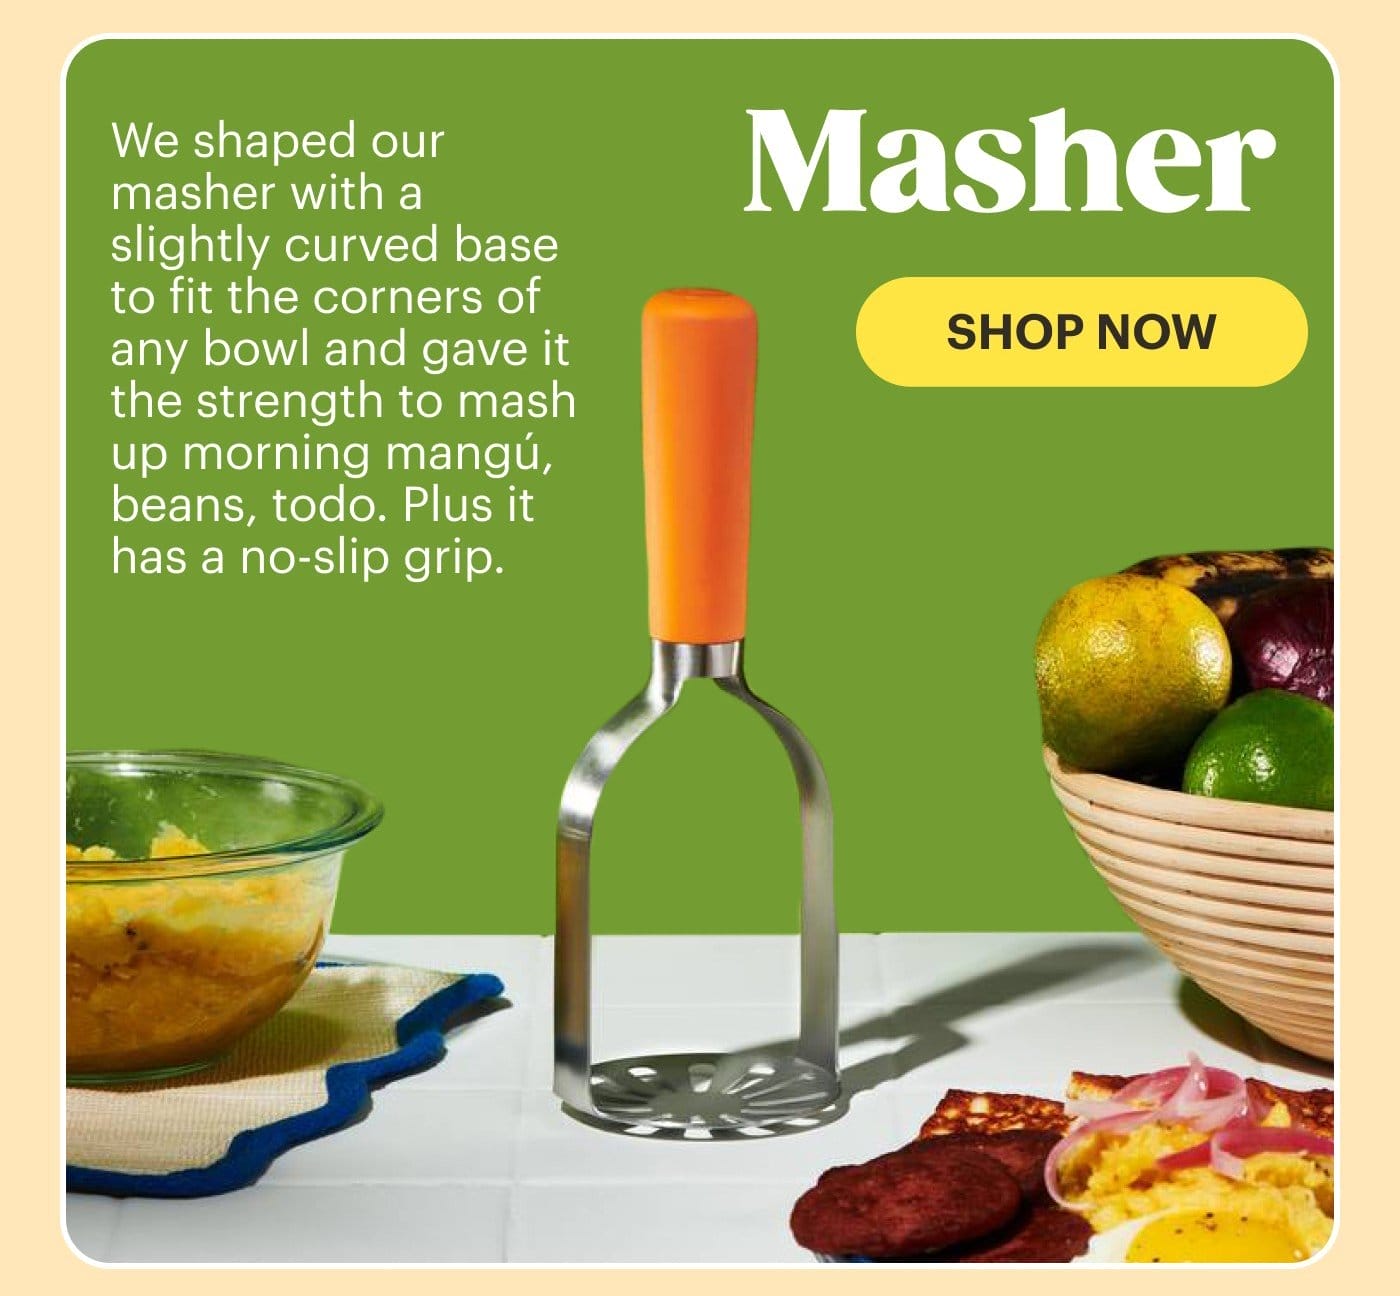 Masher SHOP NOW